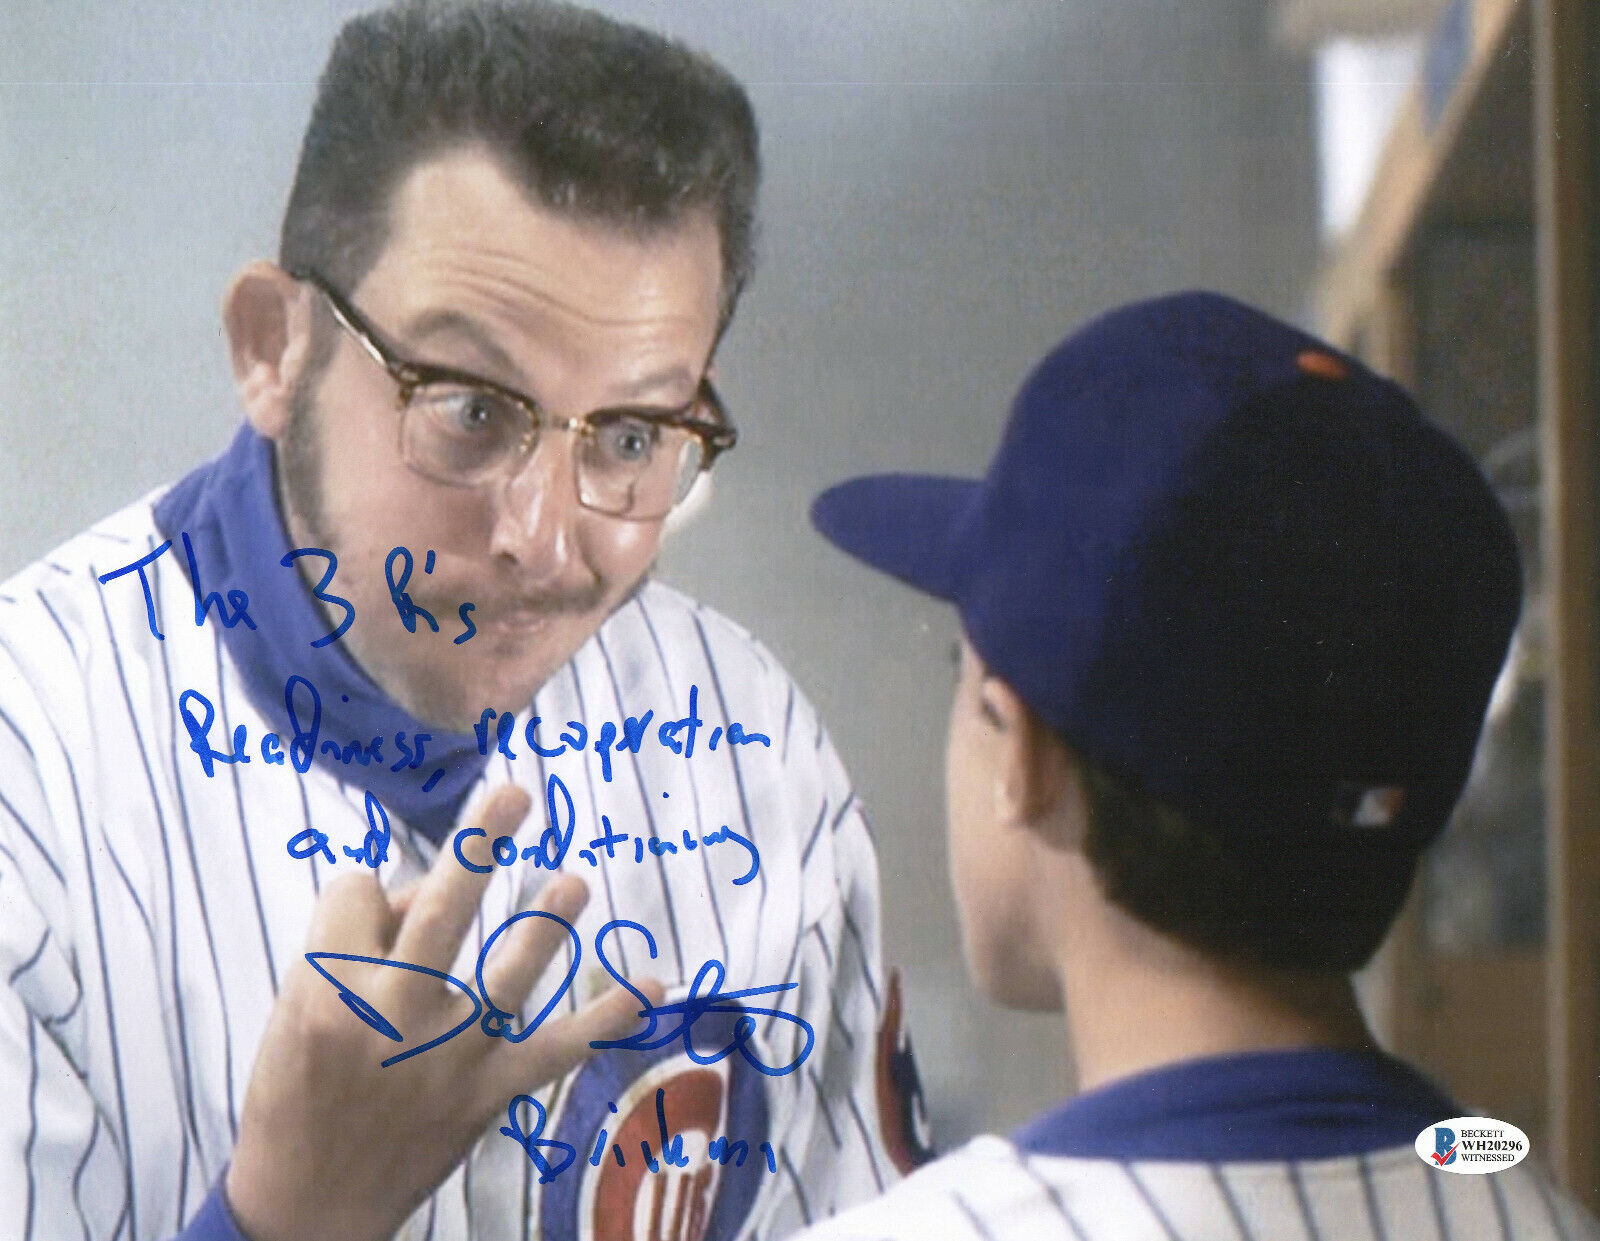 DANIEL STERN SIGNED AUTOGRAPH \'ROOKIE OF THE YEAR\' 11X14 PHOTO BECKETT BAS 58